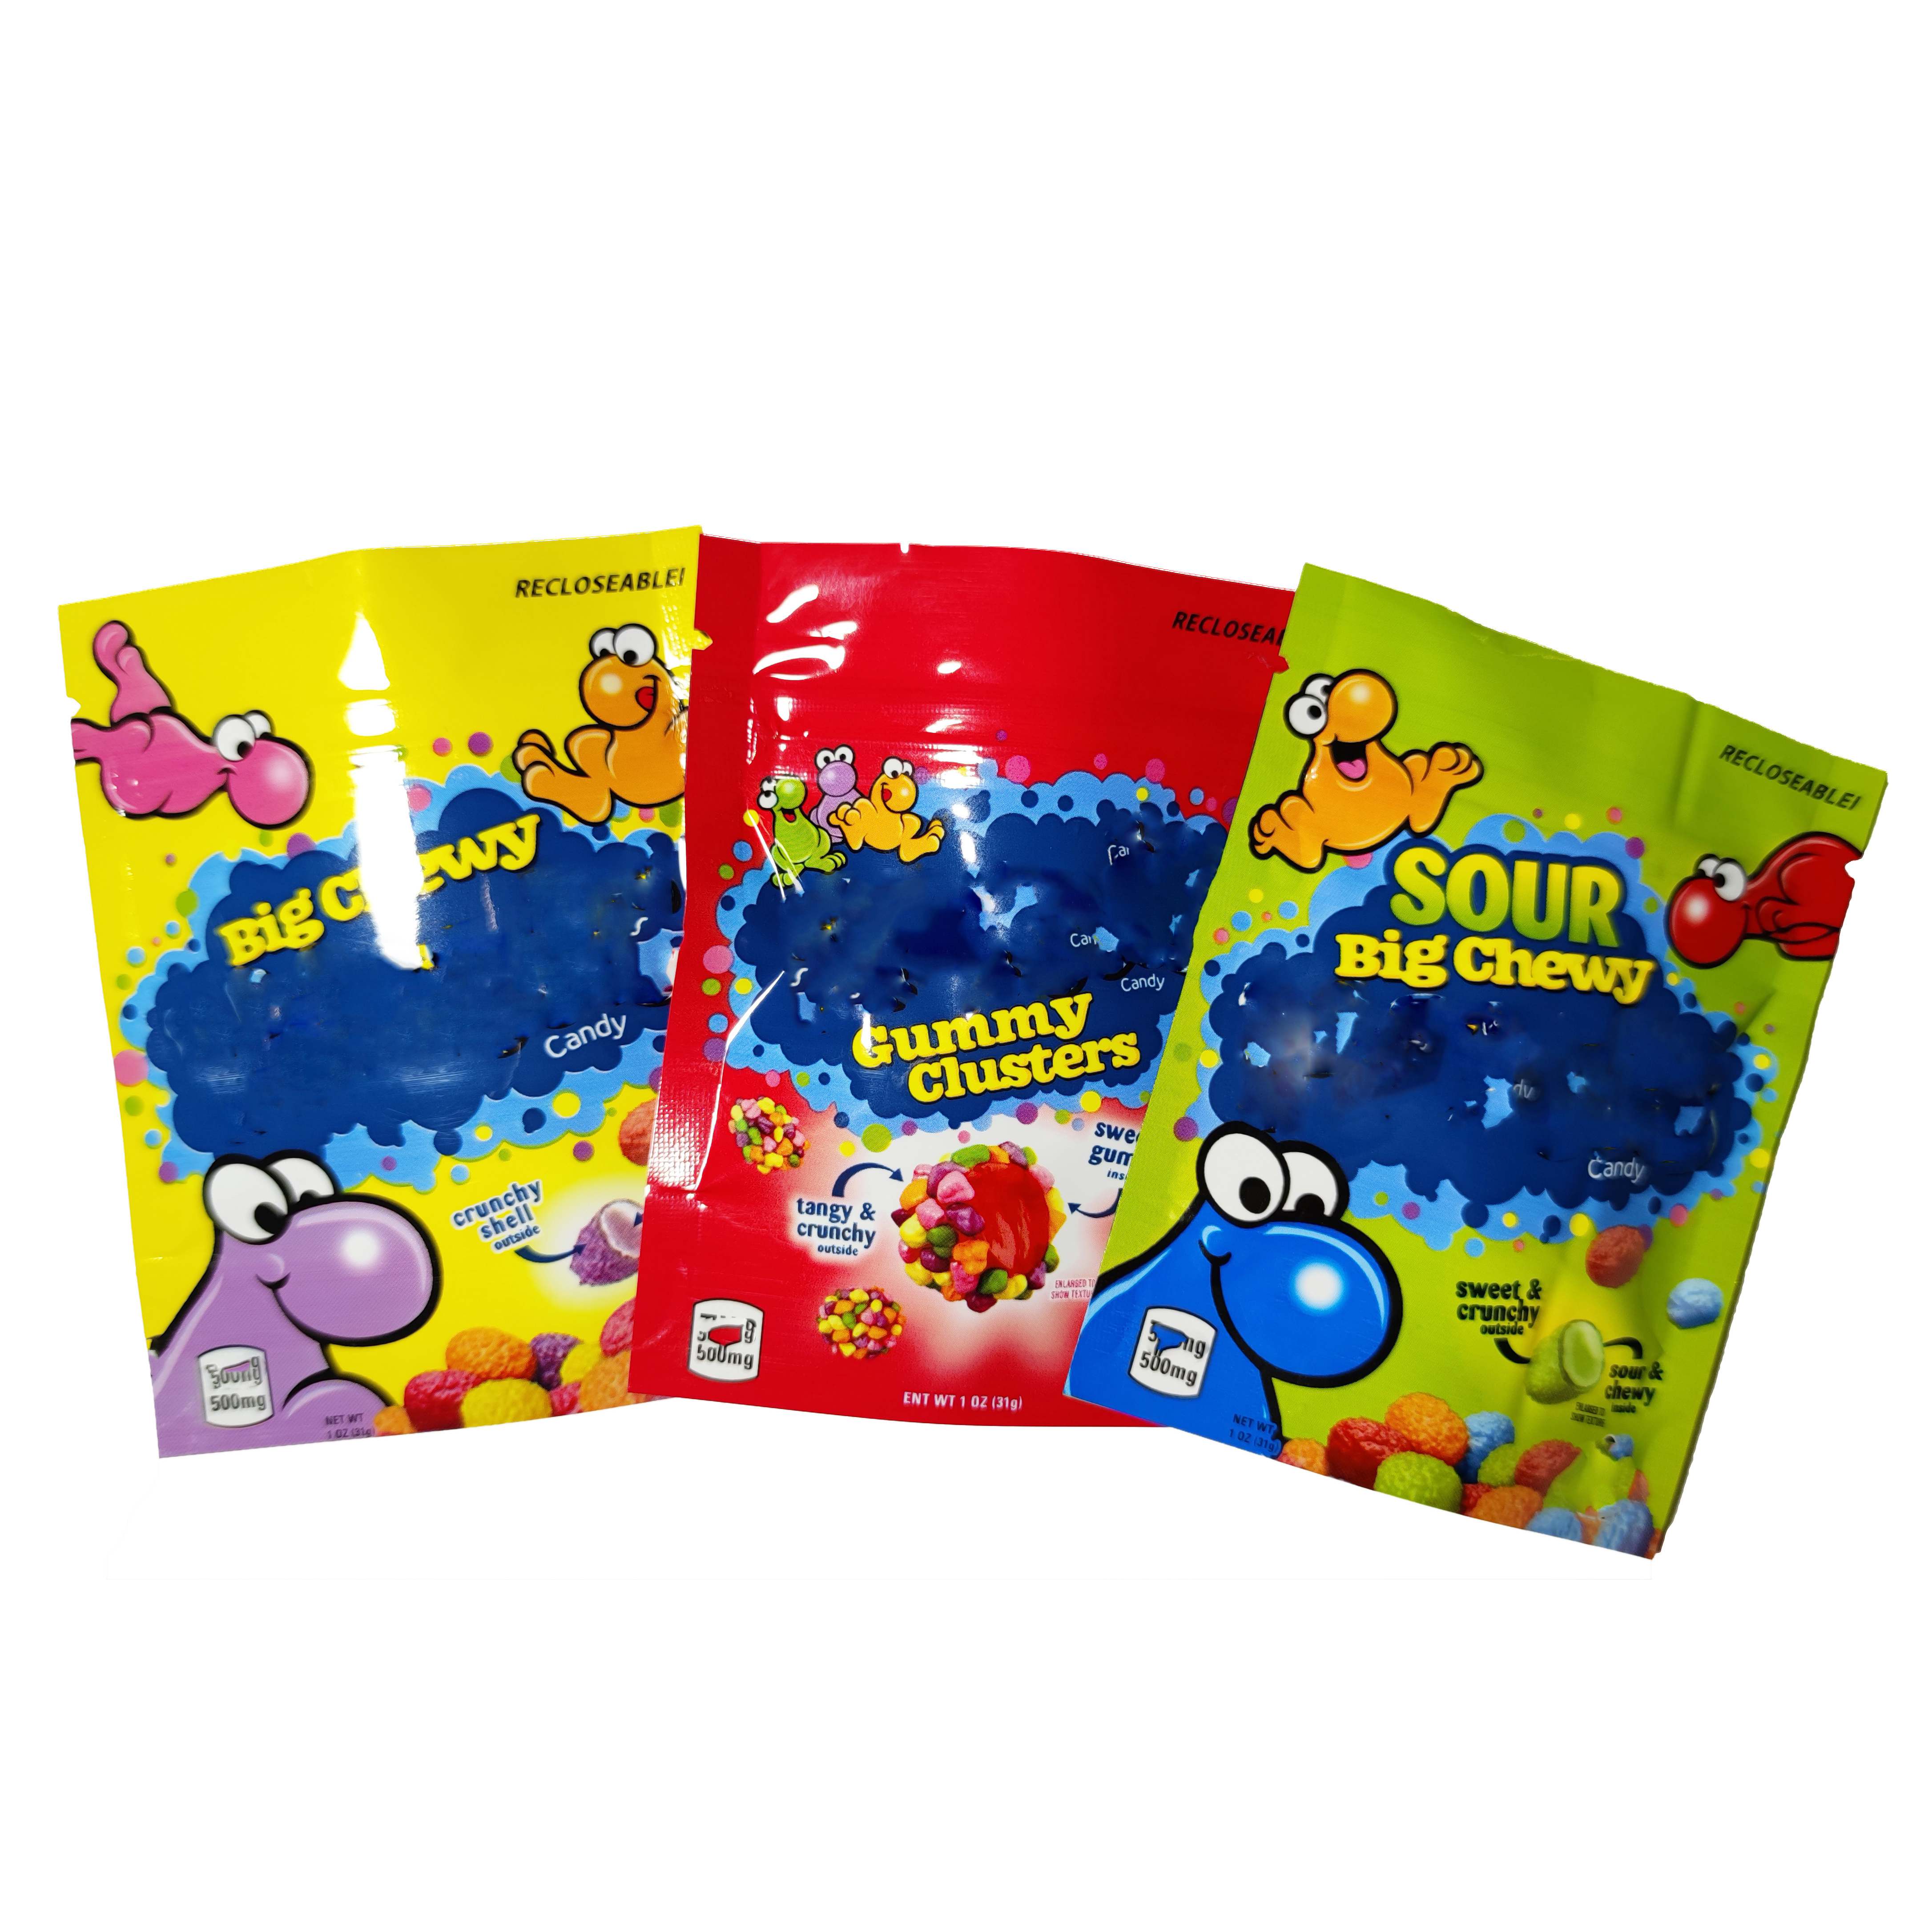 

Sours gummies rope bites candy gummy bag empty 500mg resealable plastic edibles packaging cluster big chewy sour zipper smell proof bags